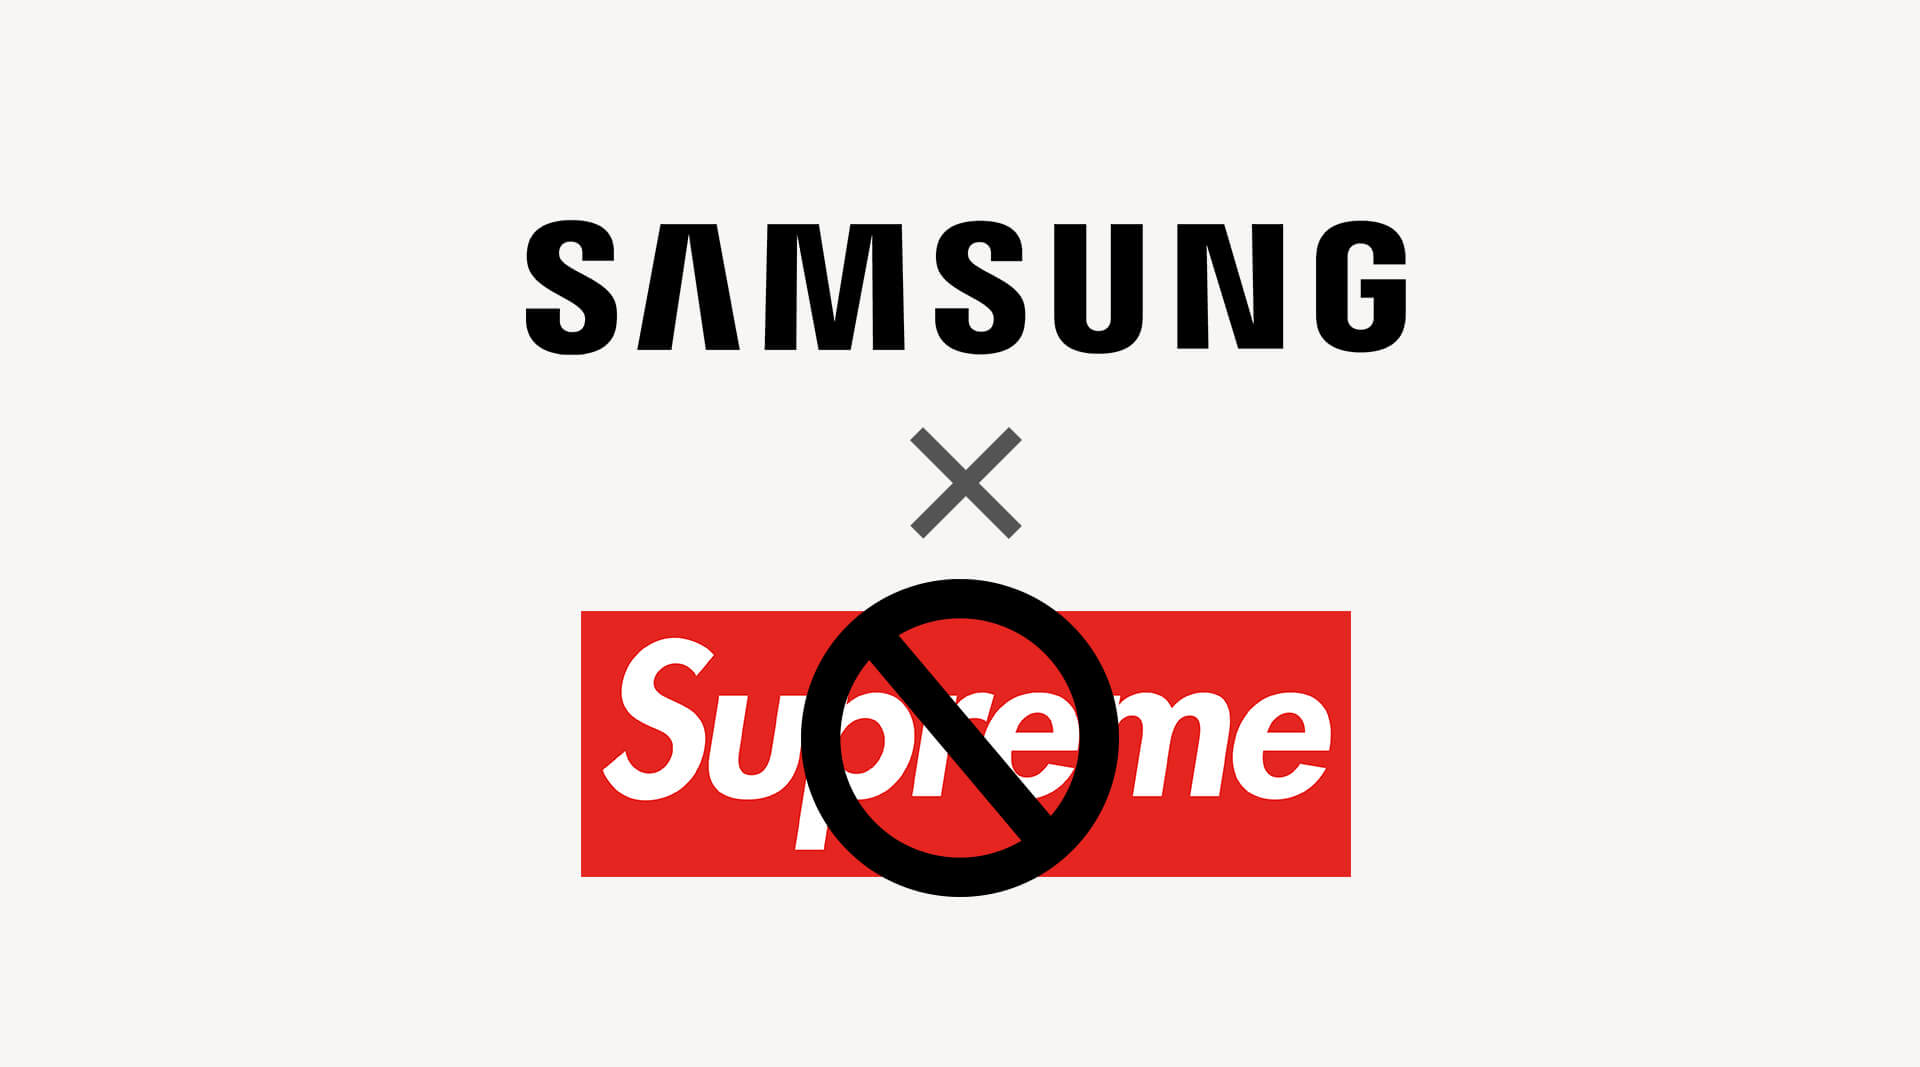 Samsung ends collaboration with knock-off Supreme